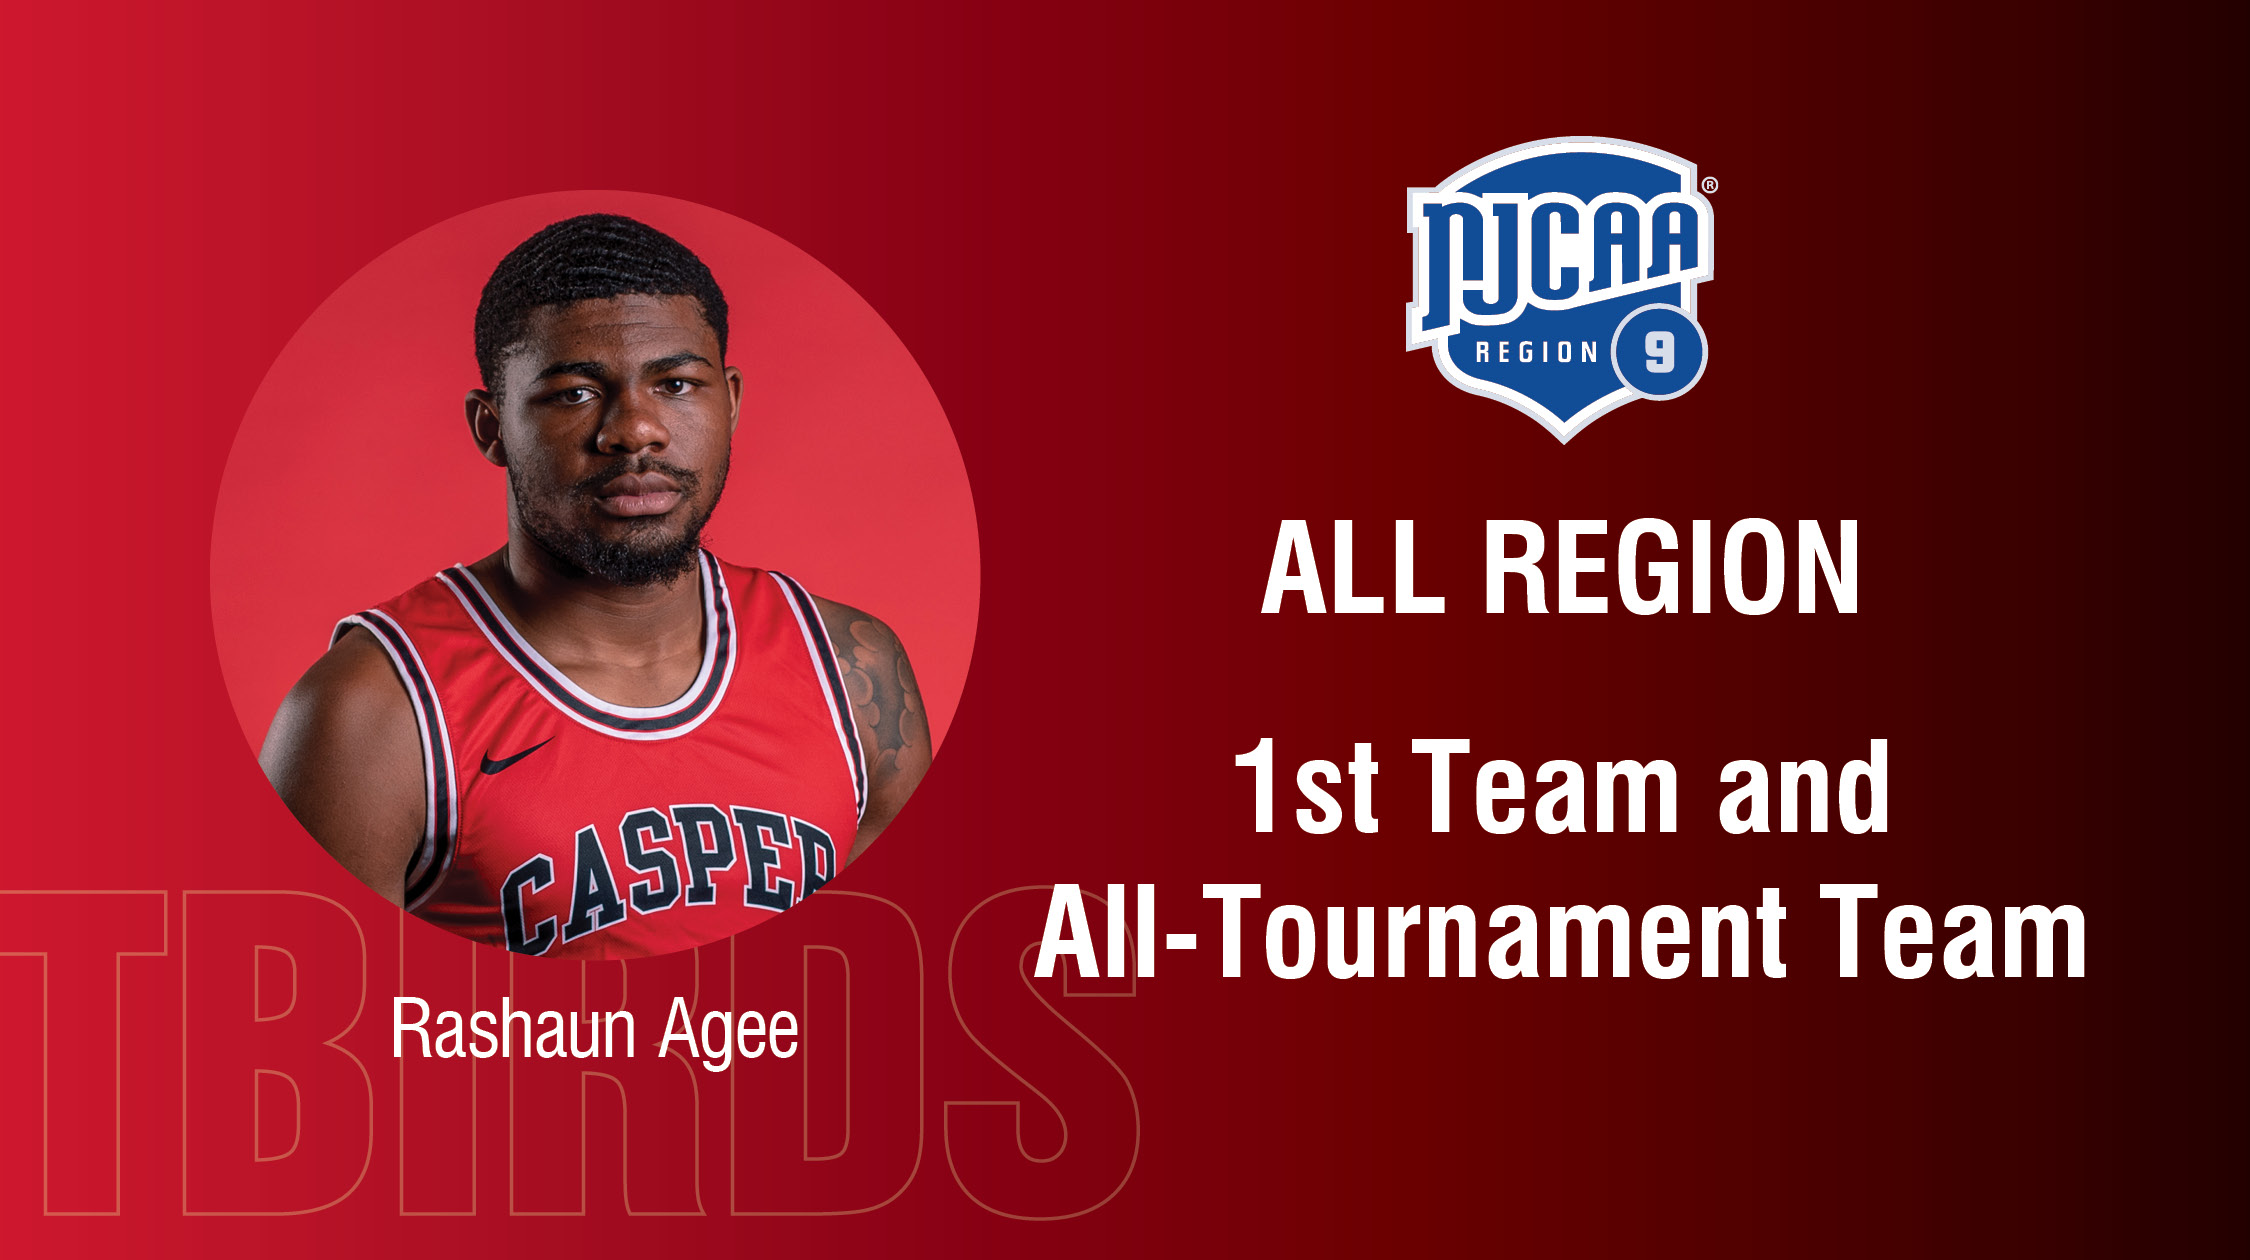 Rashaun Agee named to all region first team and all tournament team.